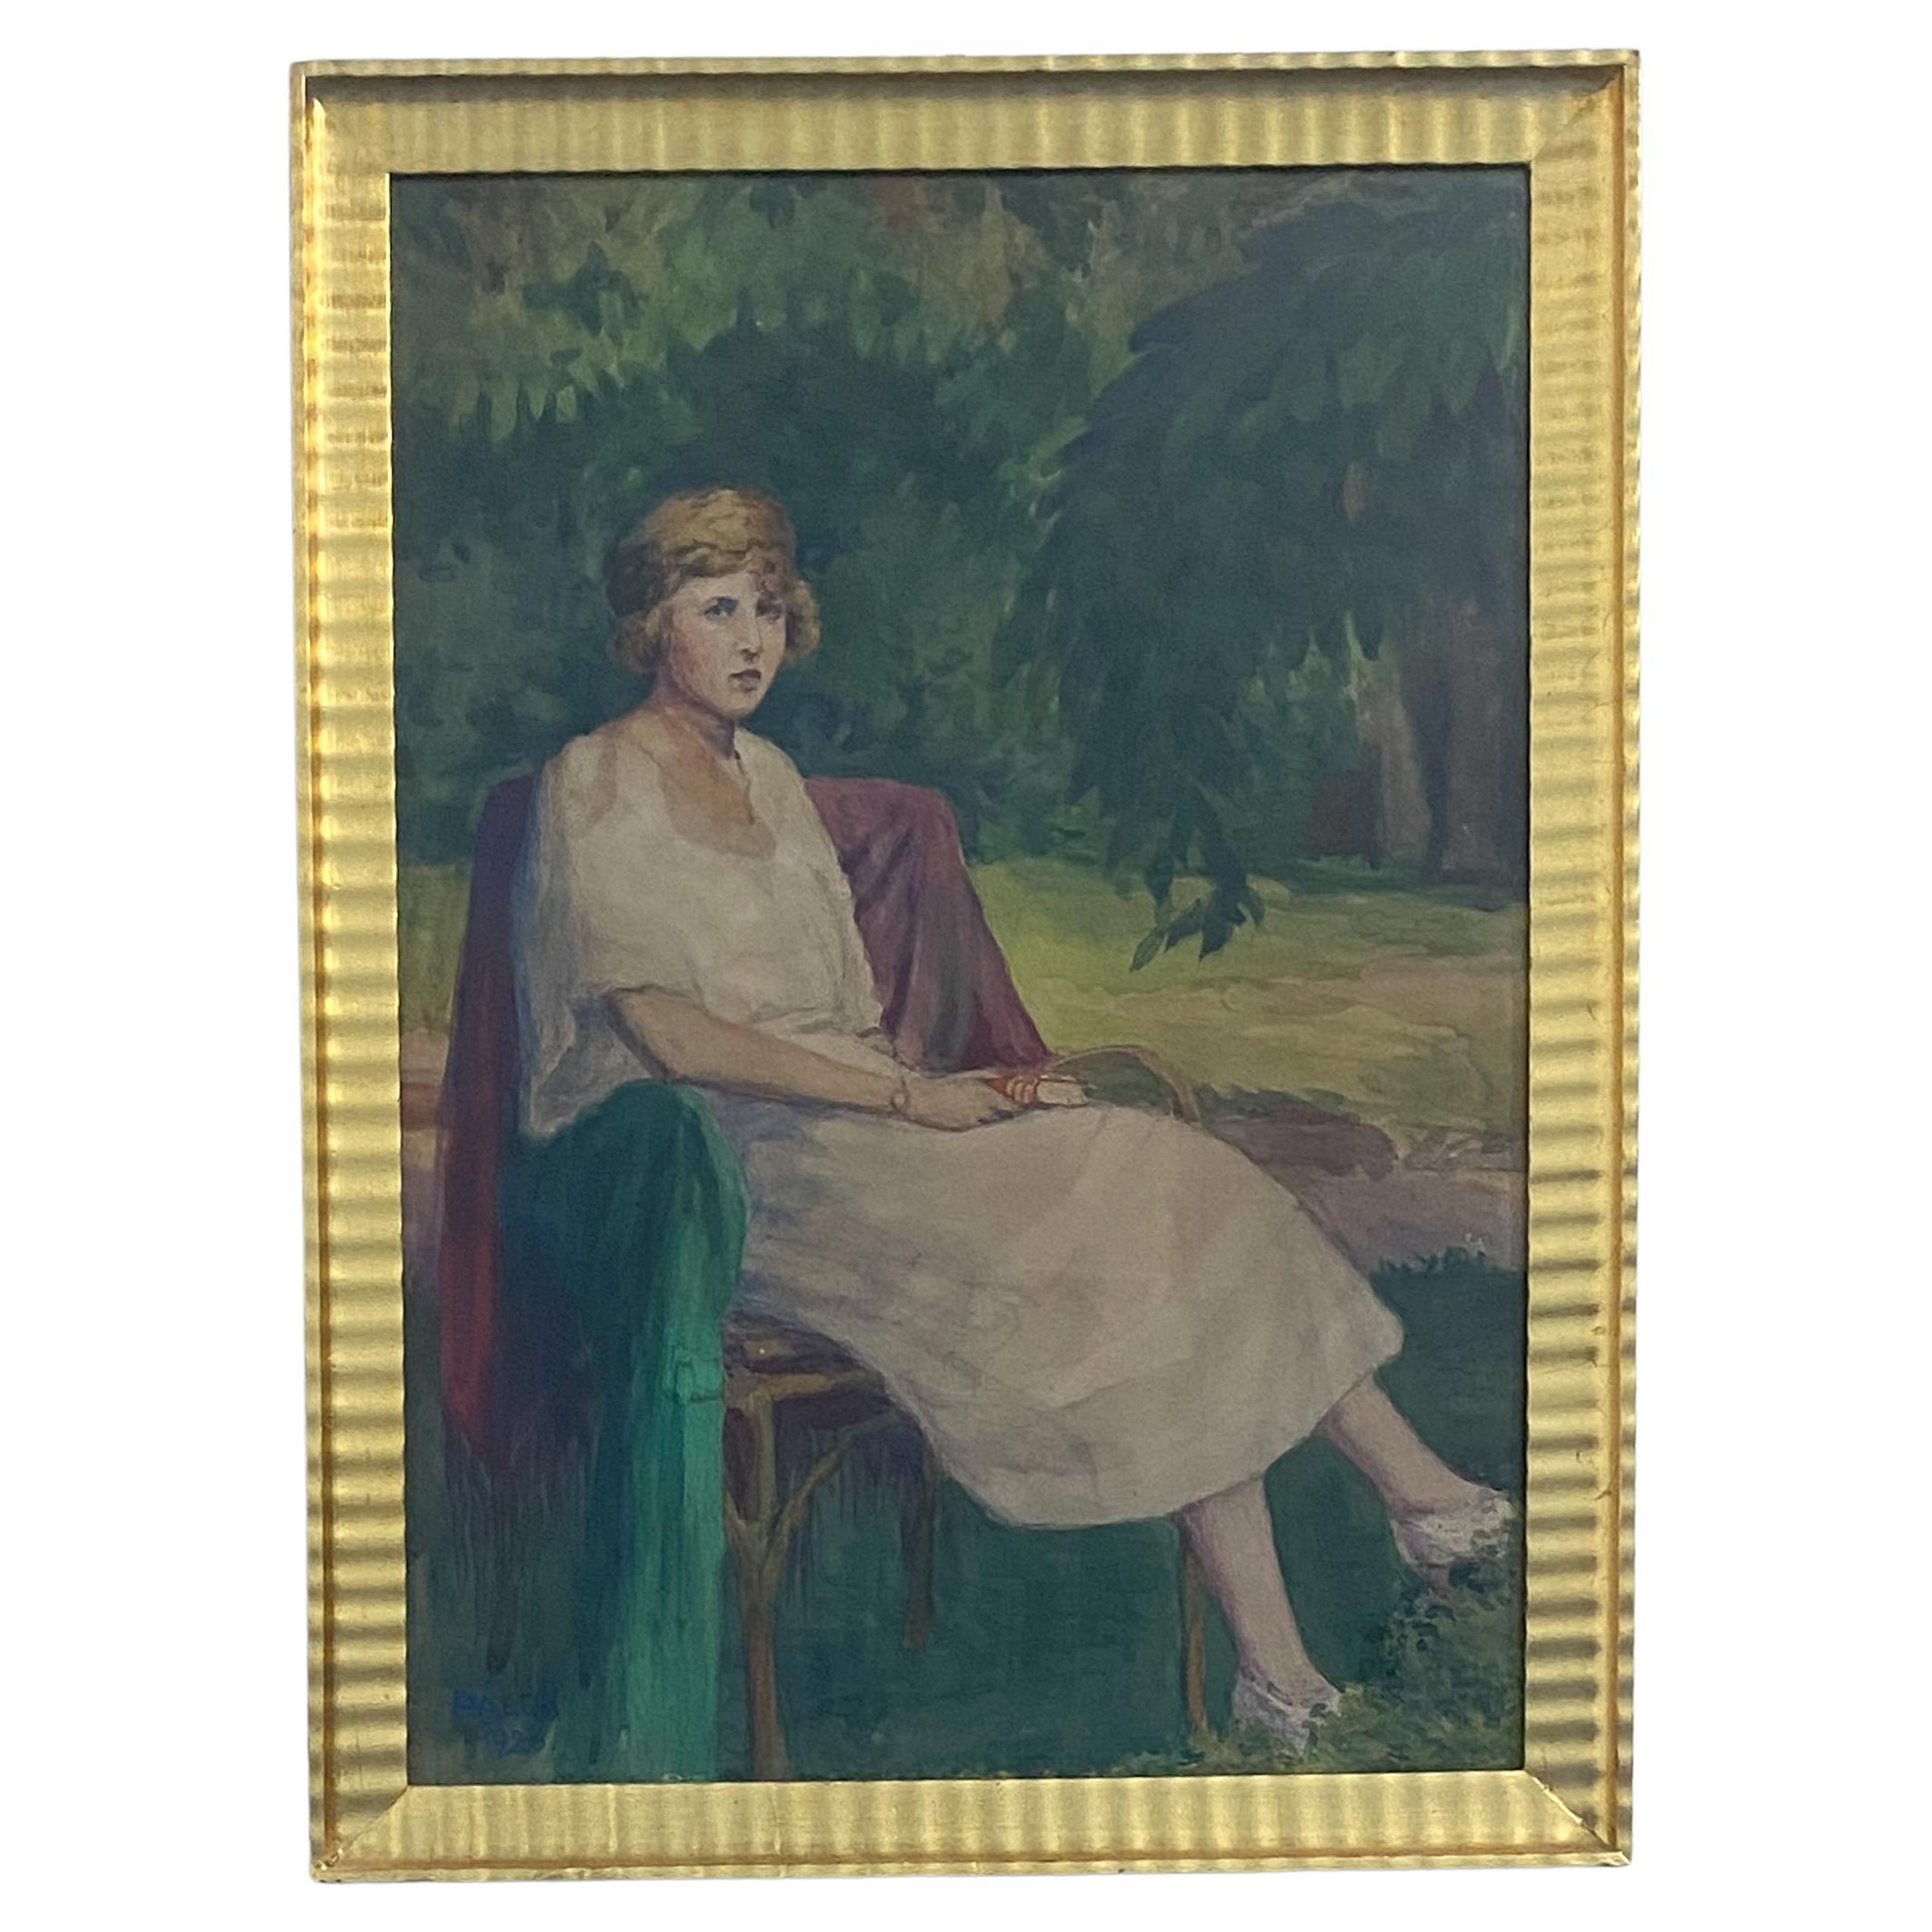 Antique watercolor painting "Woman in the Garden" executed by Palla Jeno in 1920 For Sale